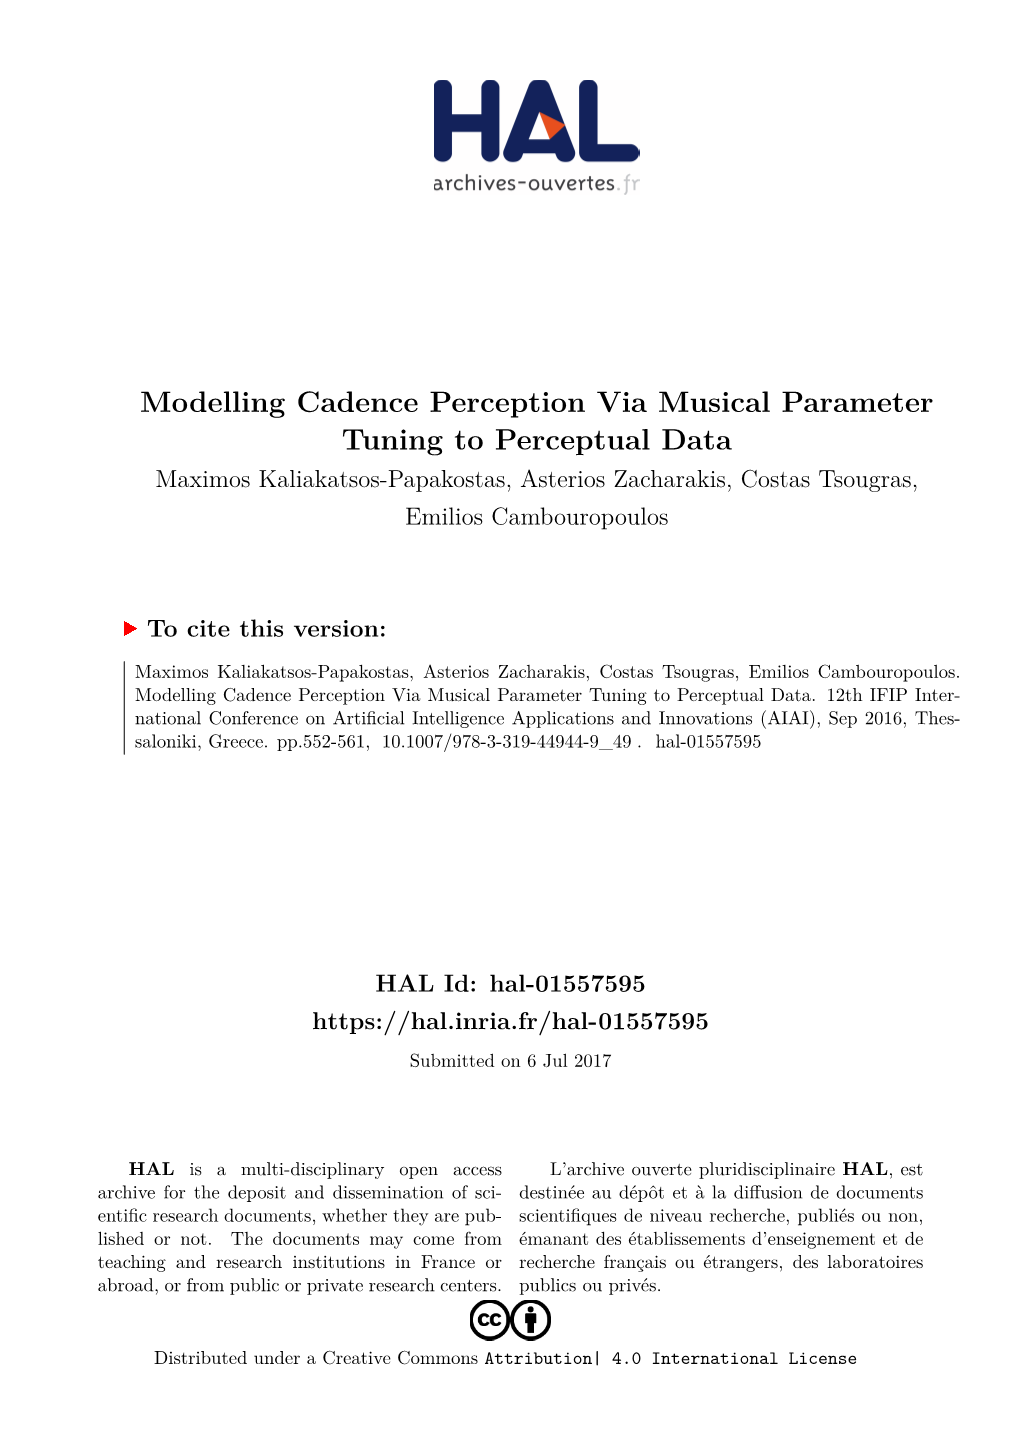 Modelling Cadence Perception Via Musical Parameter Tuning To